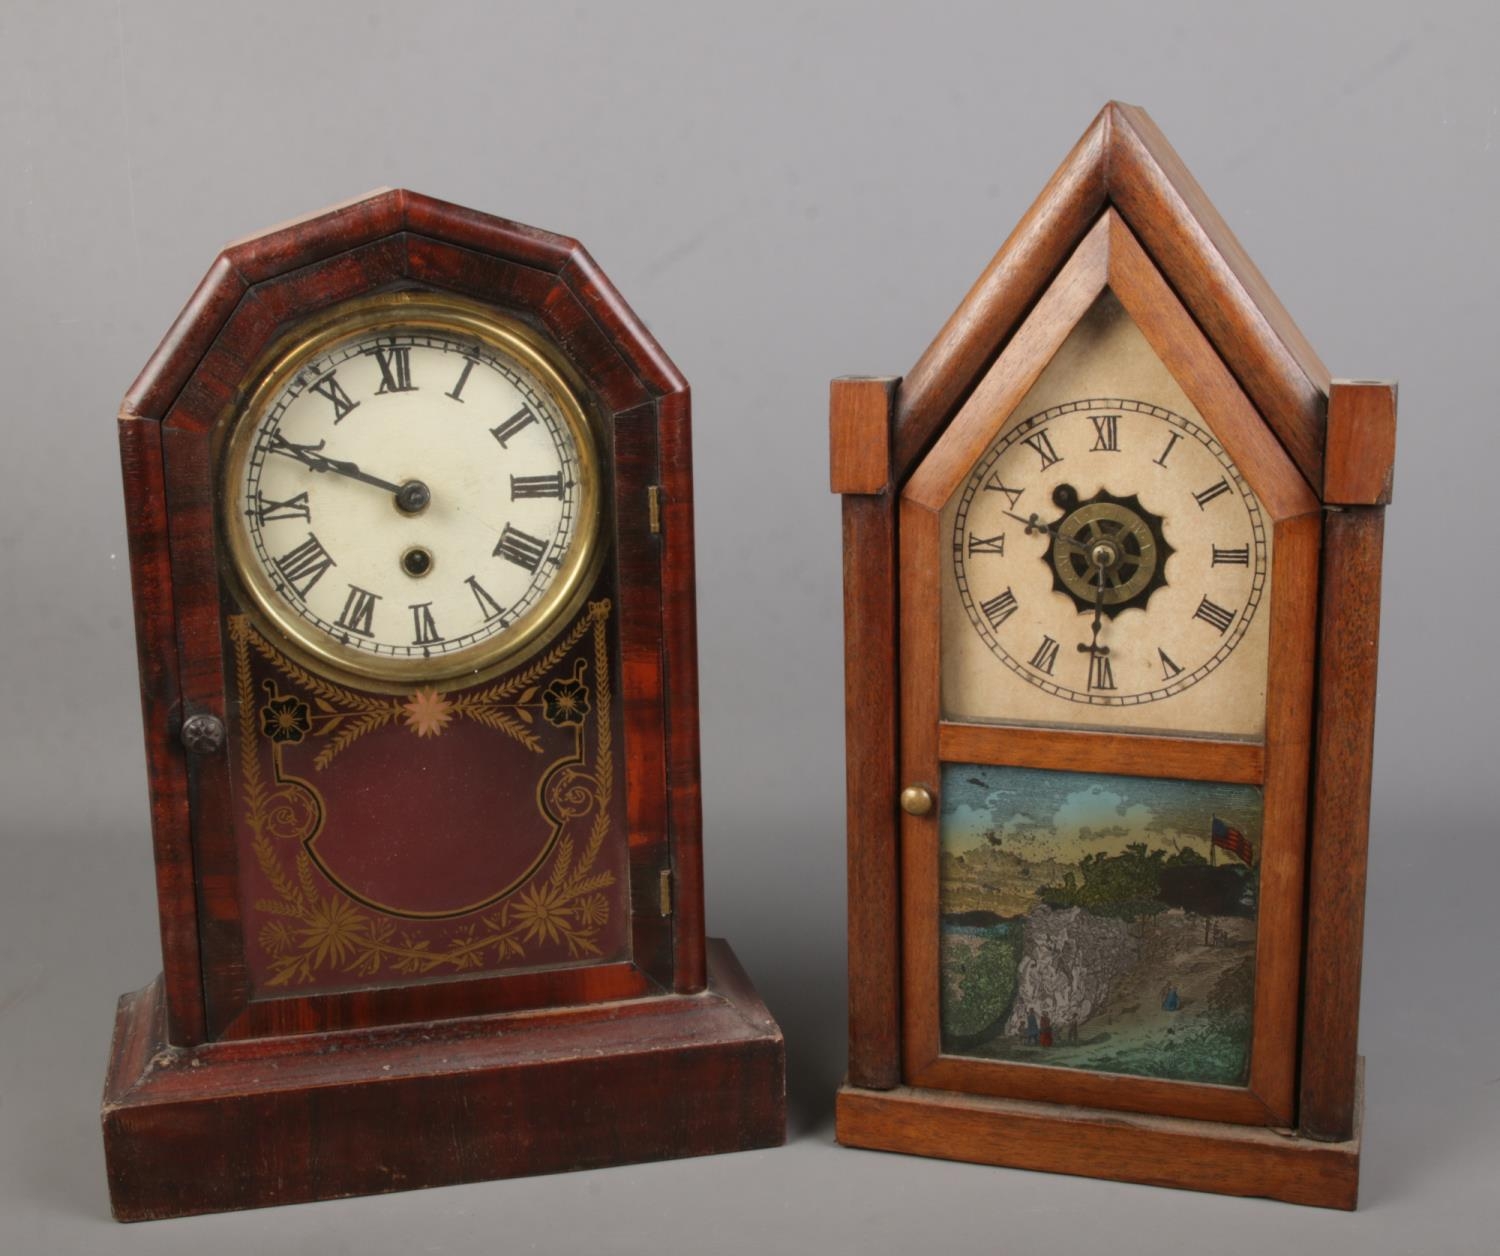 Two American clocks including 8 day wall clock and mantel clock examples. wall clock example has